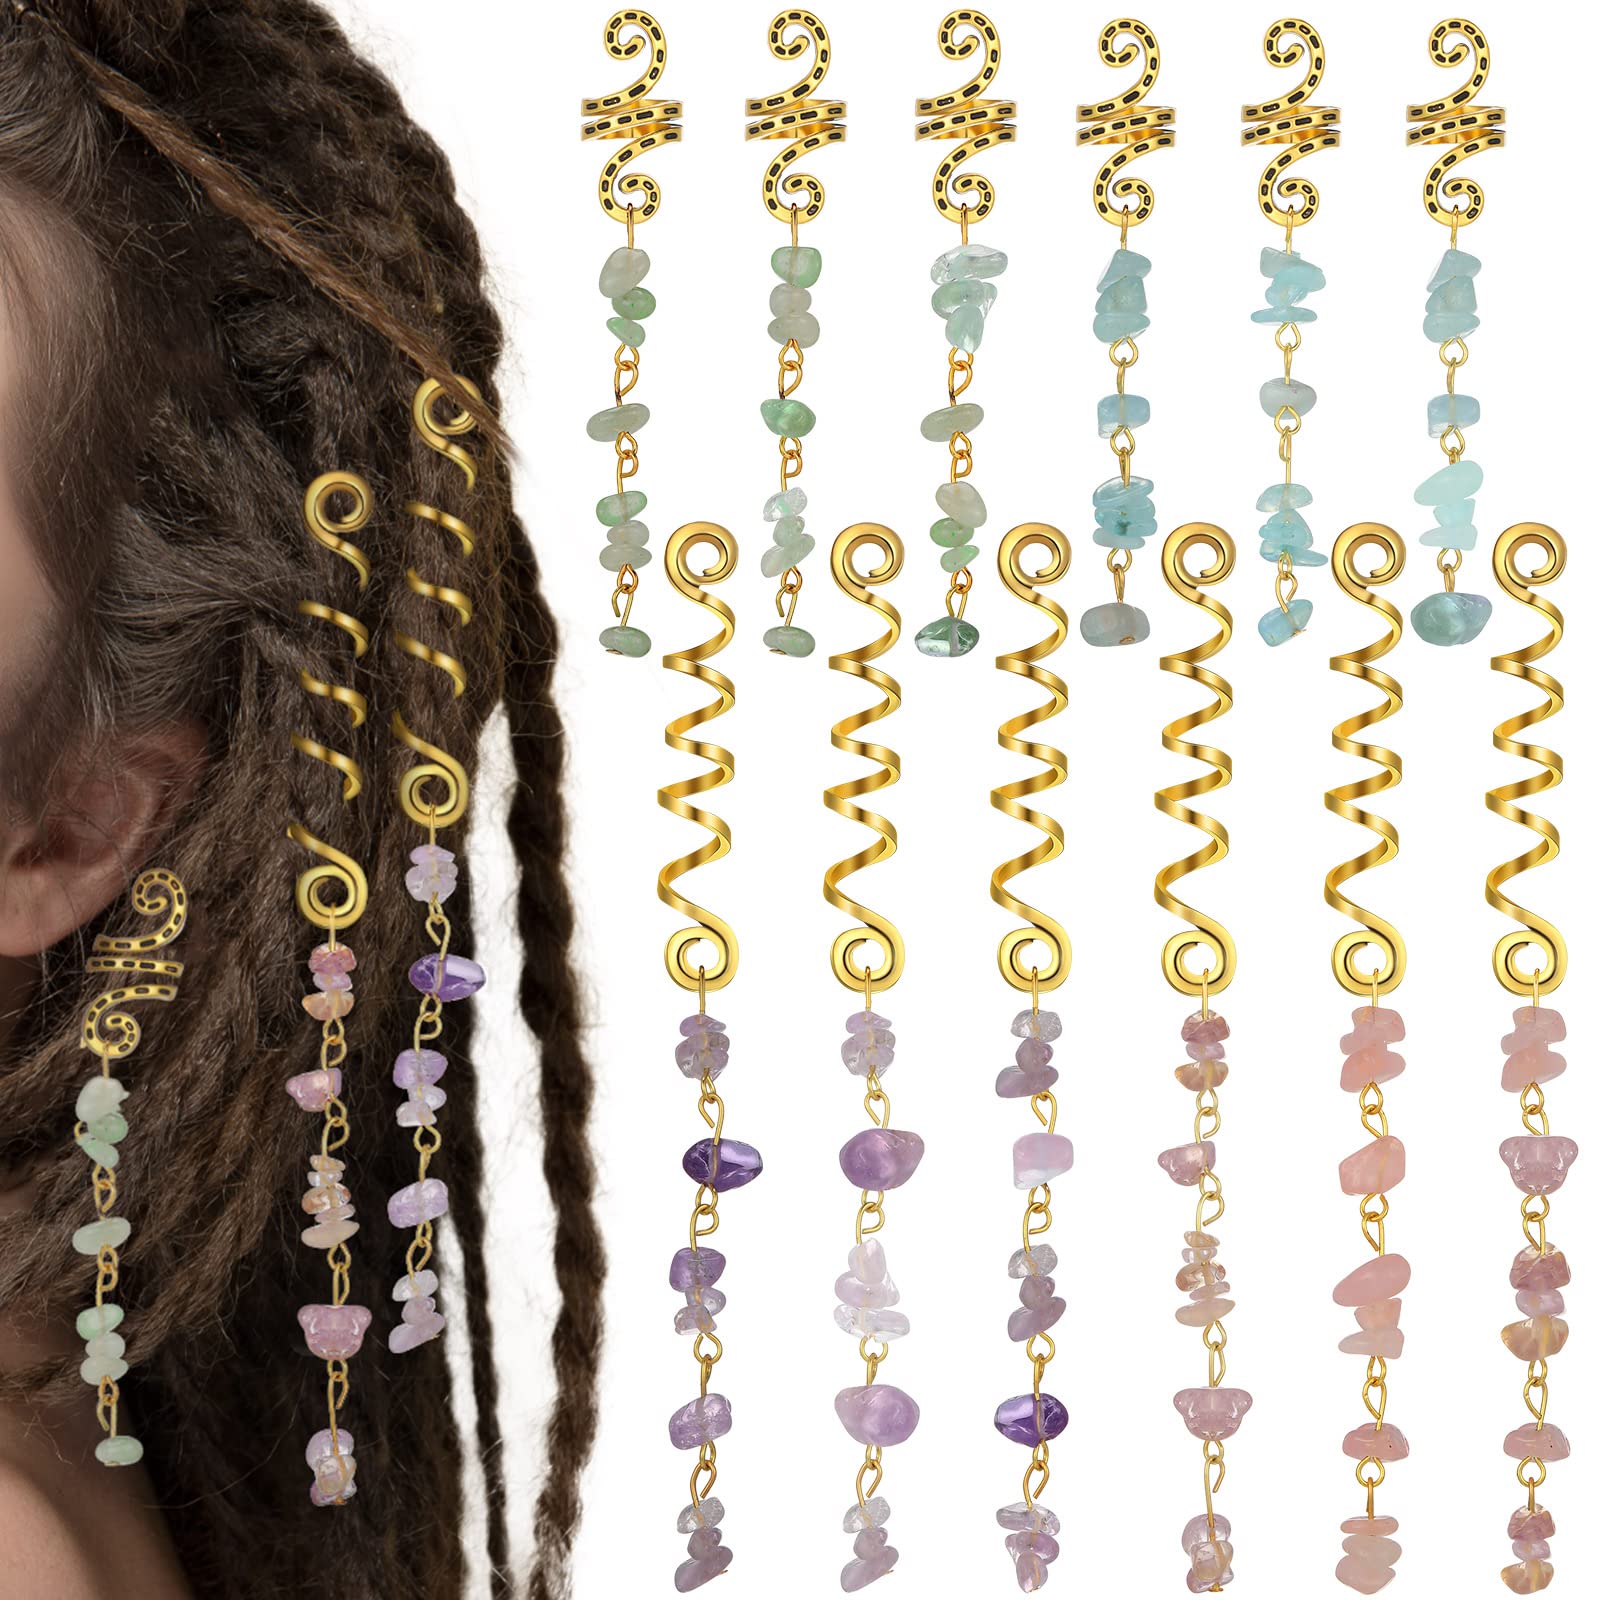 12 Pieces Colored Natural Stone Pendant Hair Jewelry for Braids